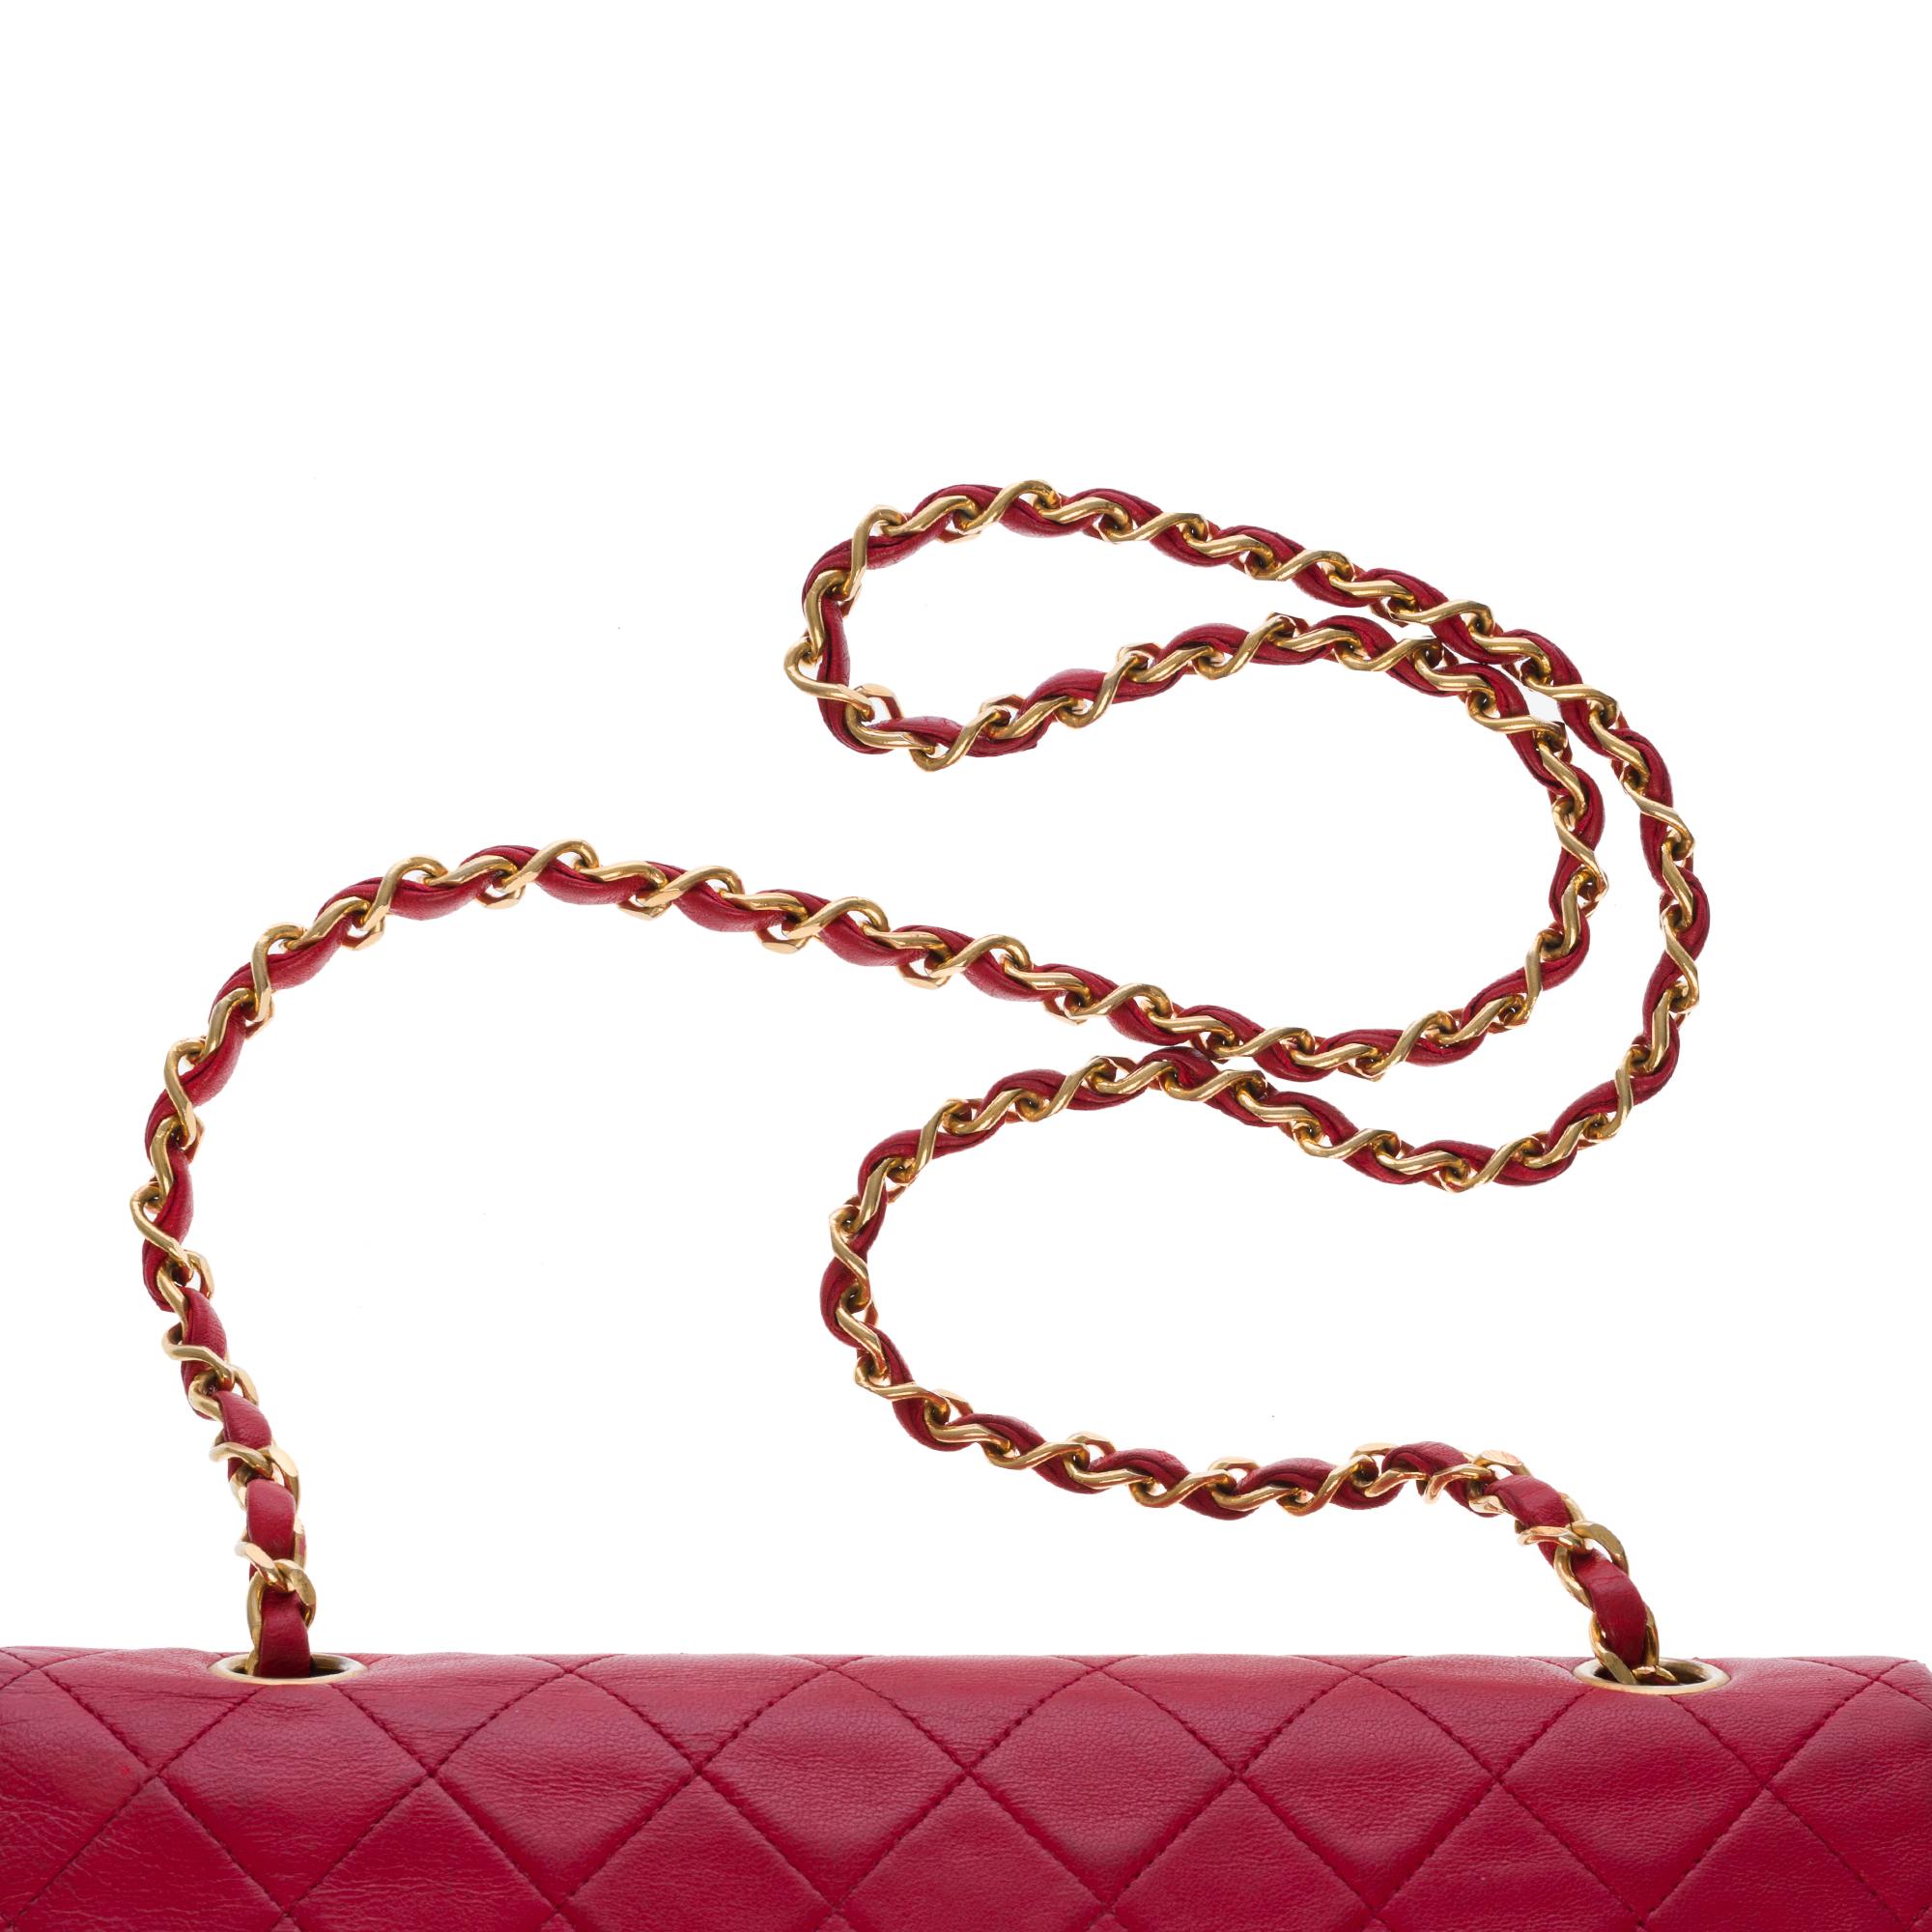 Chanel Timeless Medium double flap Shoulder bag in Red quilted leather, GHW 4